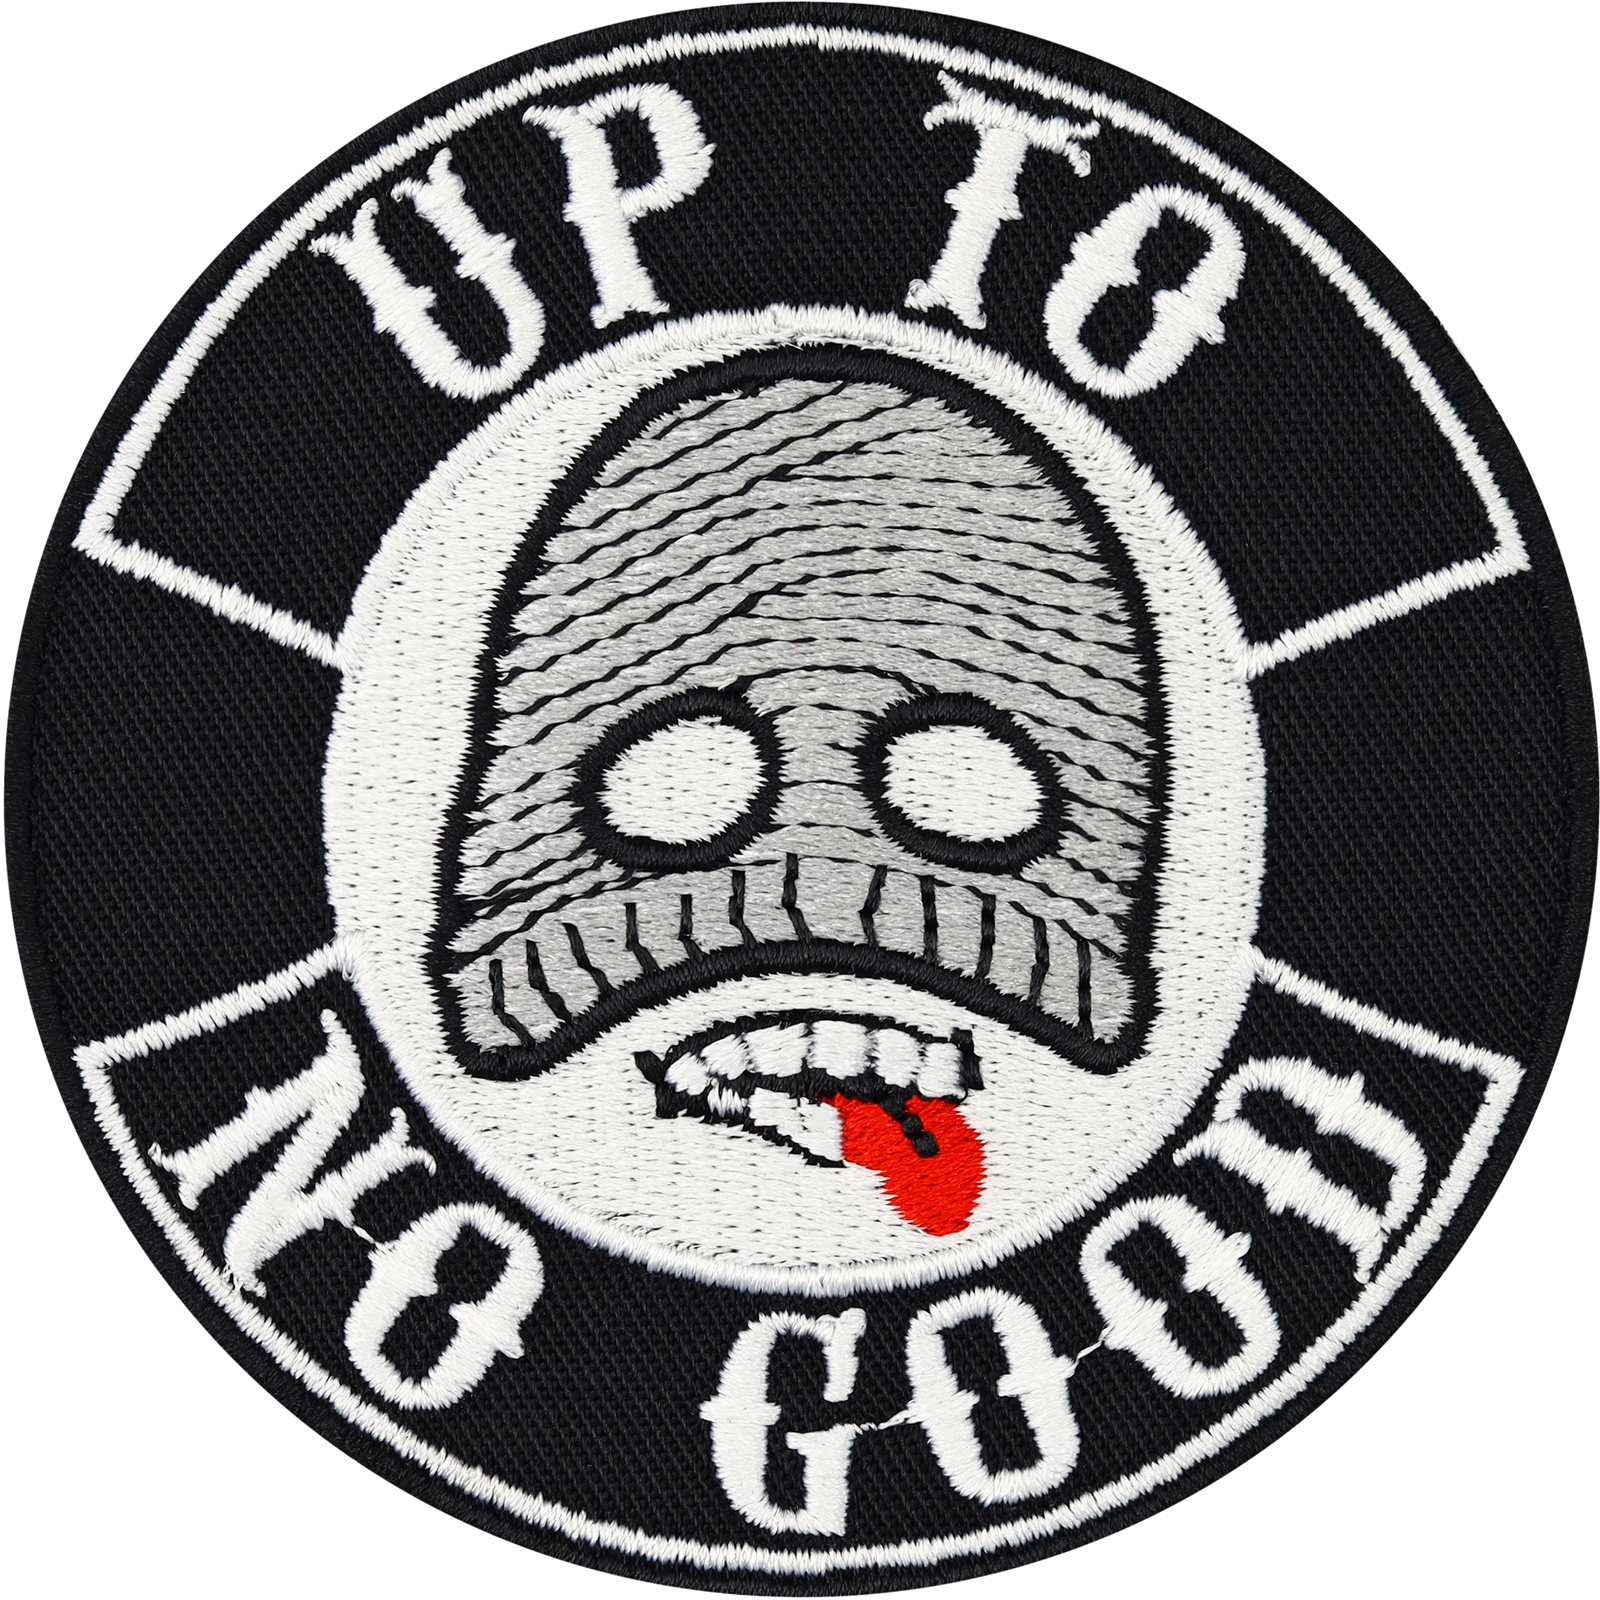 Up to no good - Patch